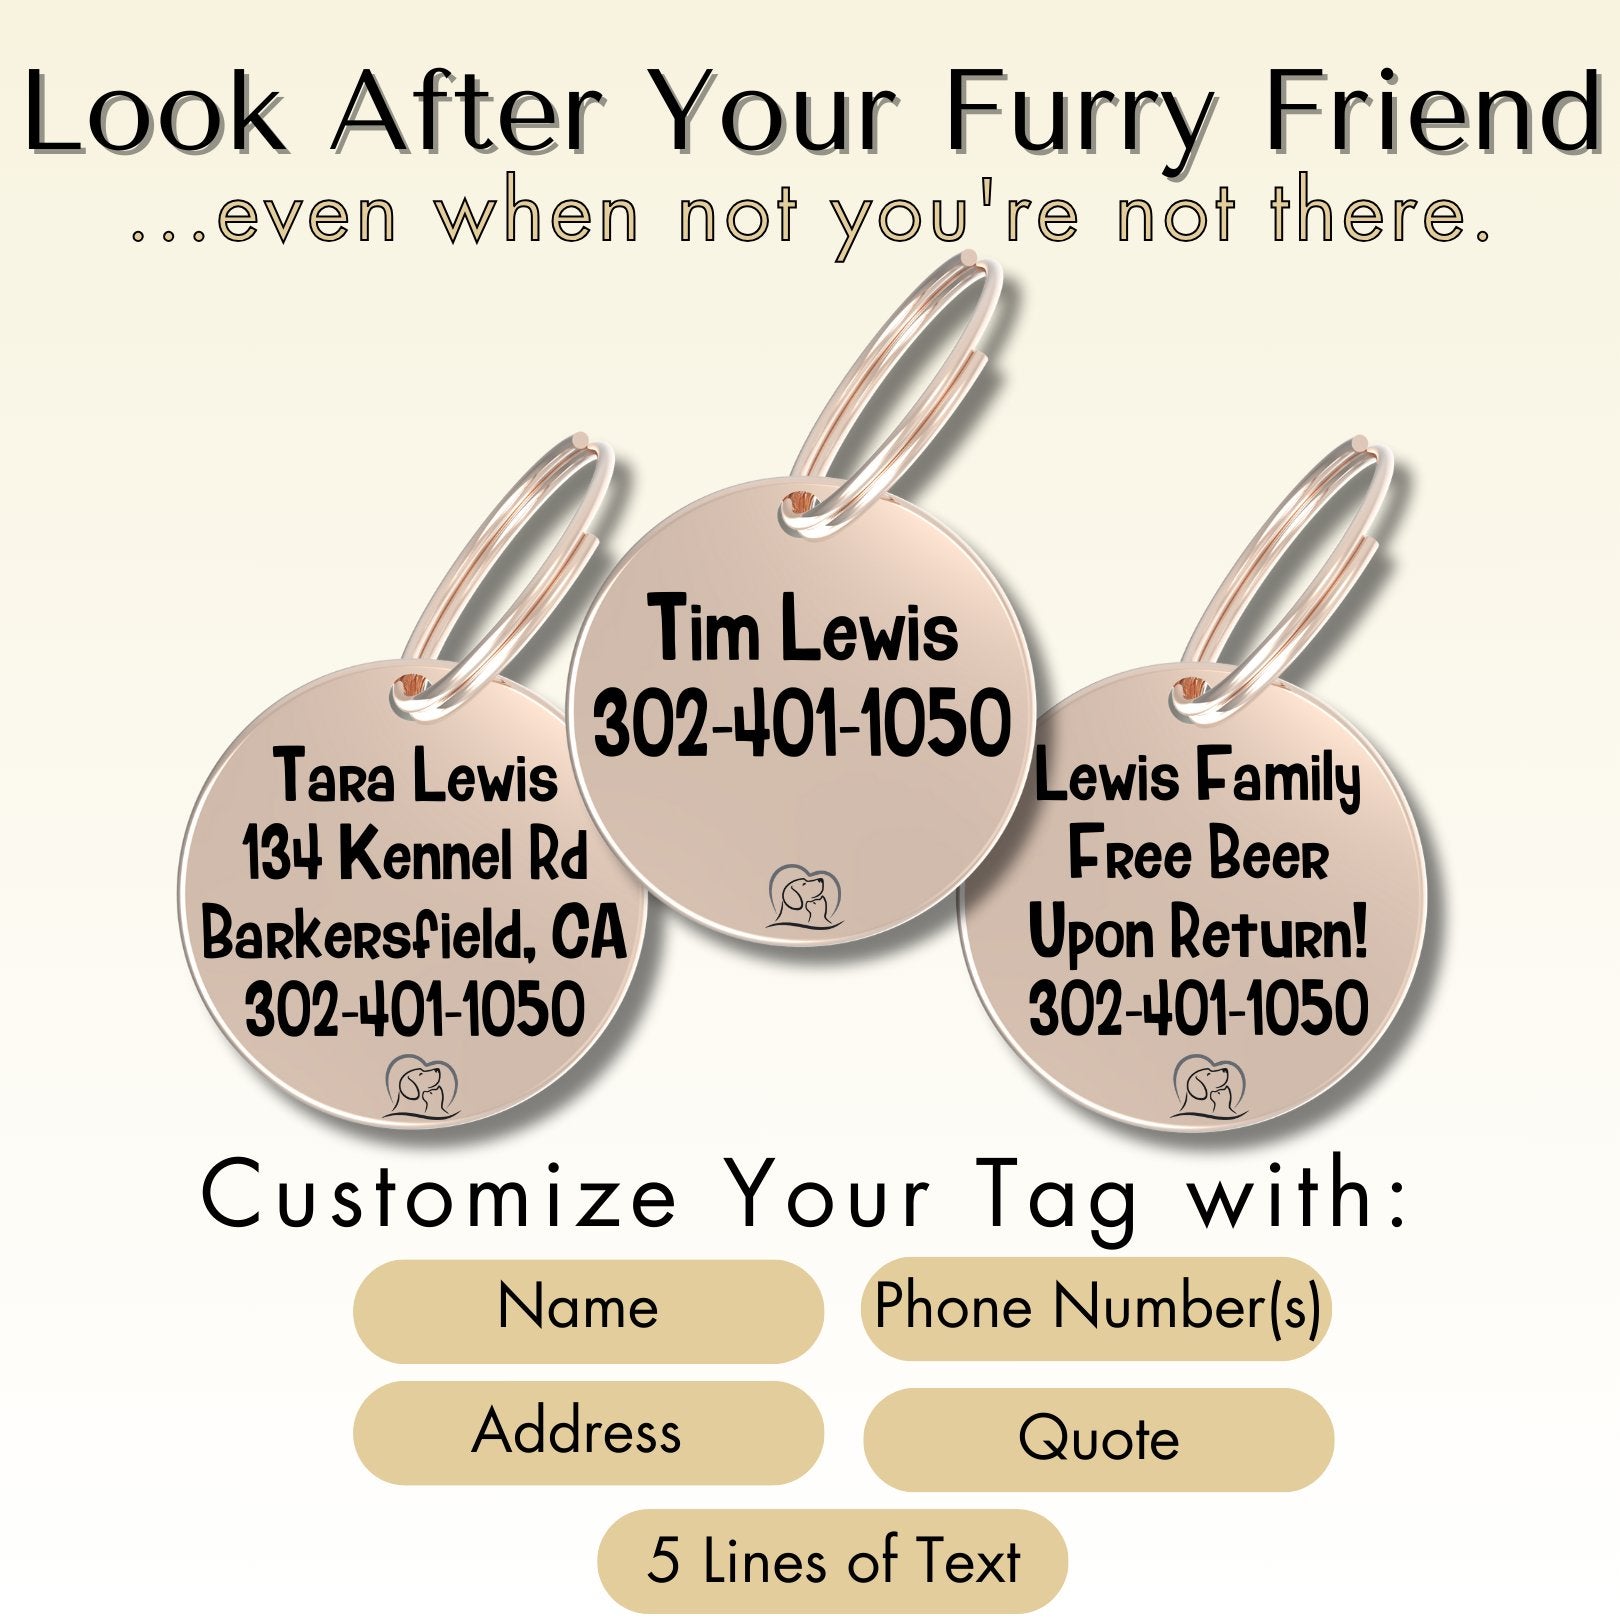 Breed Dog Tag - Personalized Breed Dog Tag (Rat Terrier)